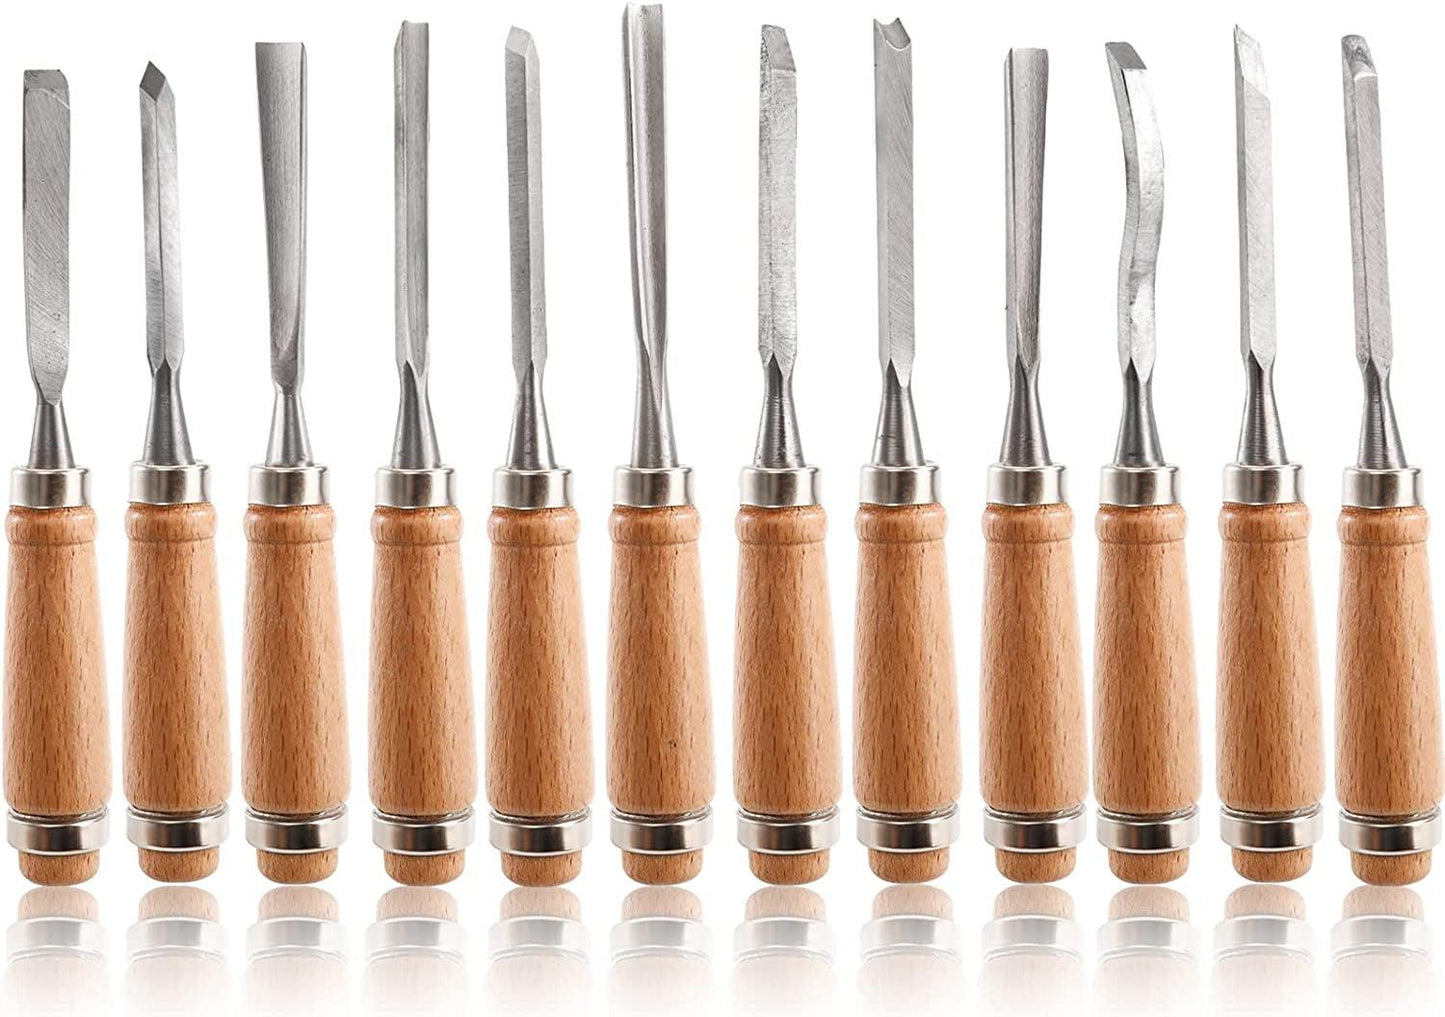 12 PCS Wood Carving Tools, Gouges Woodworking Chisels, Full Size Wood Carving Knifes - WoodArtSupply